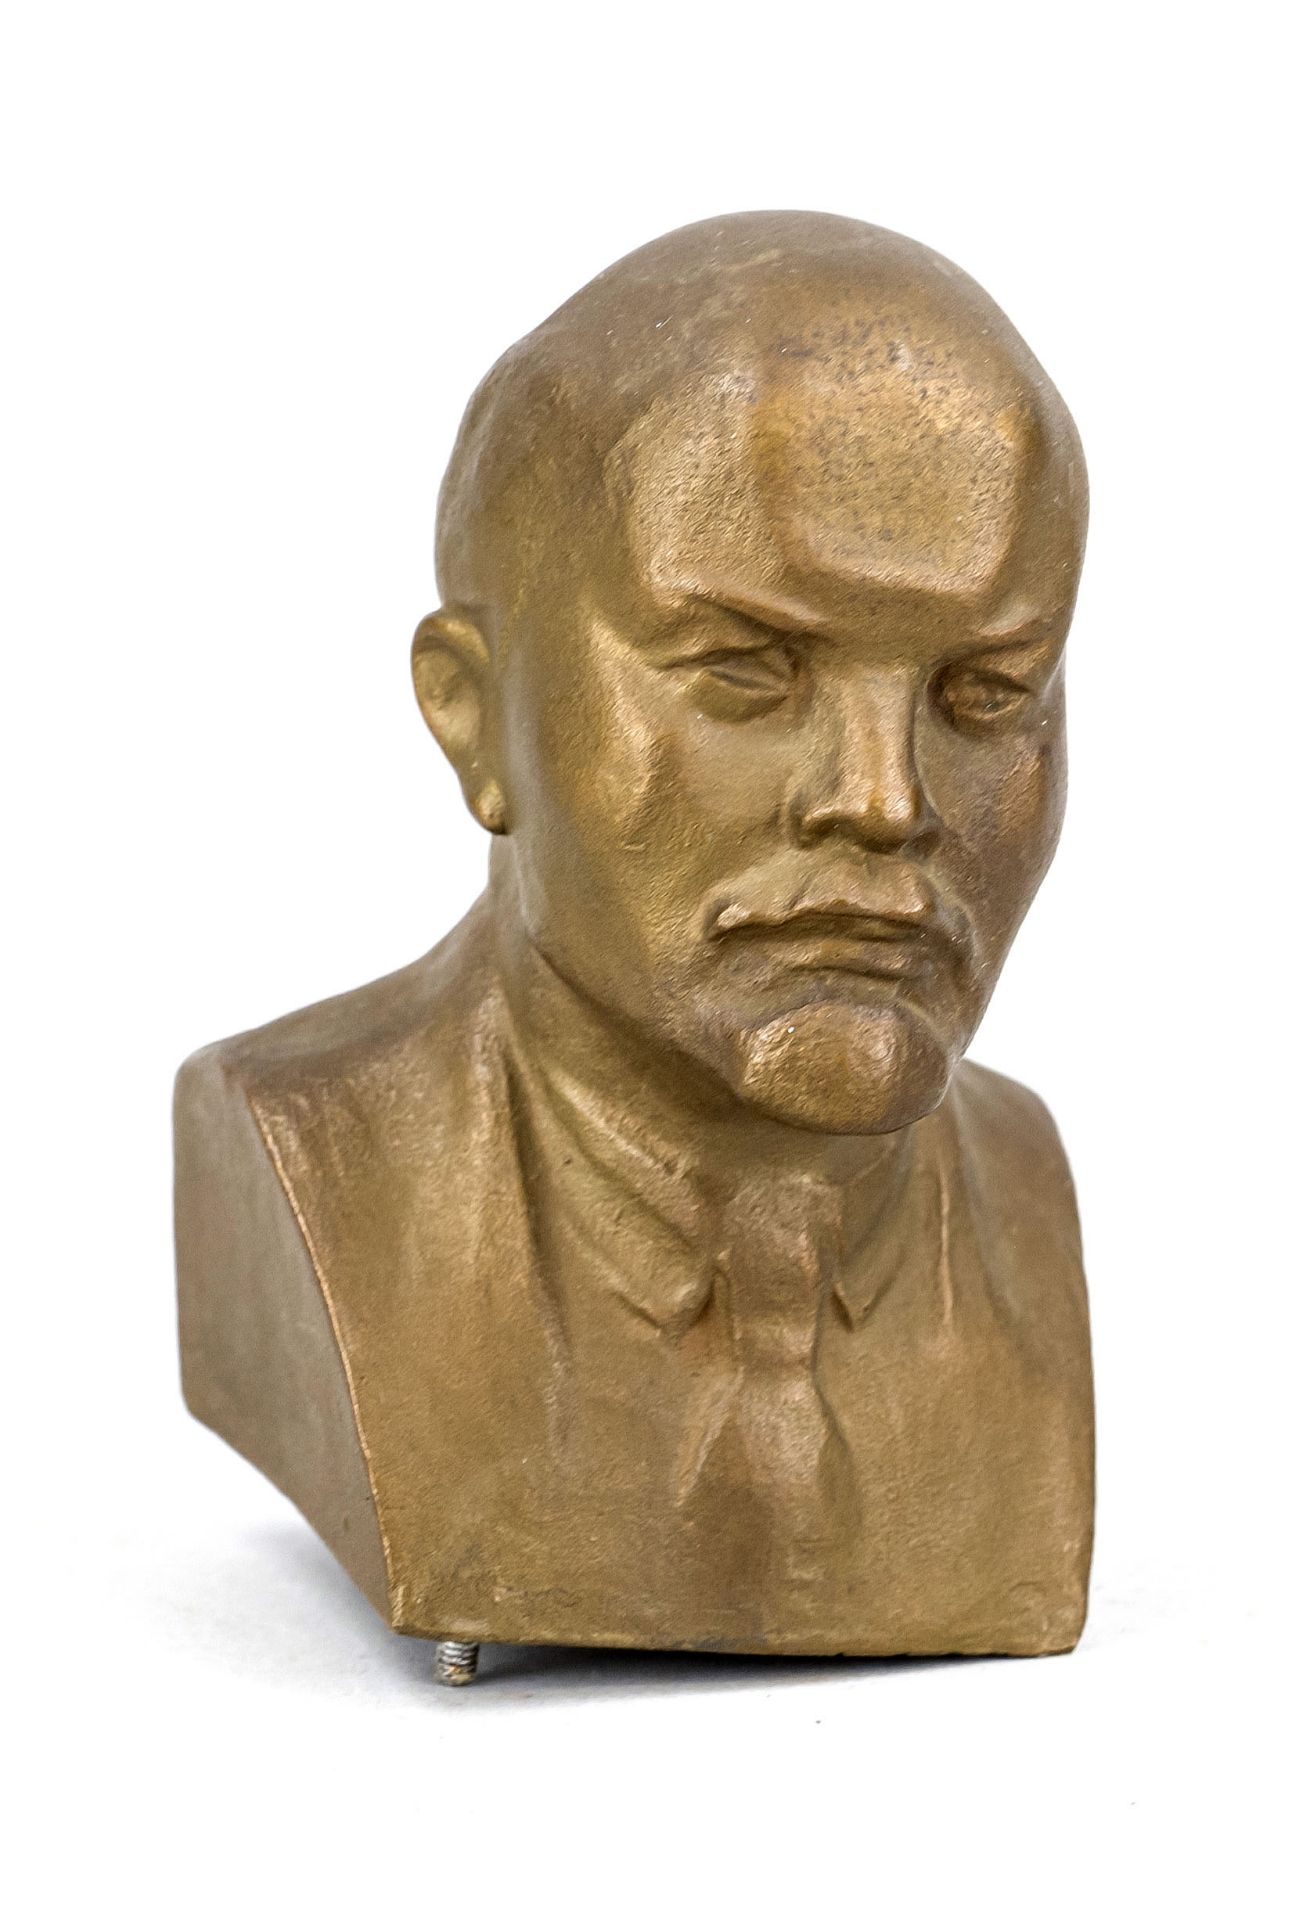 Soviet sculptor, mid 20th century, bust of Lenin, patinated bronze, inscribed in Cyrillic on the